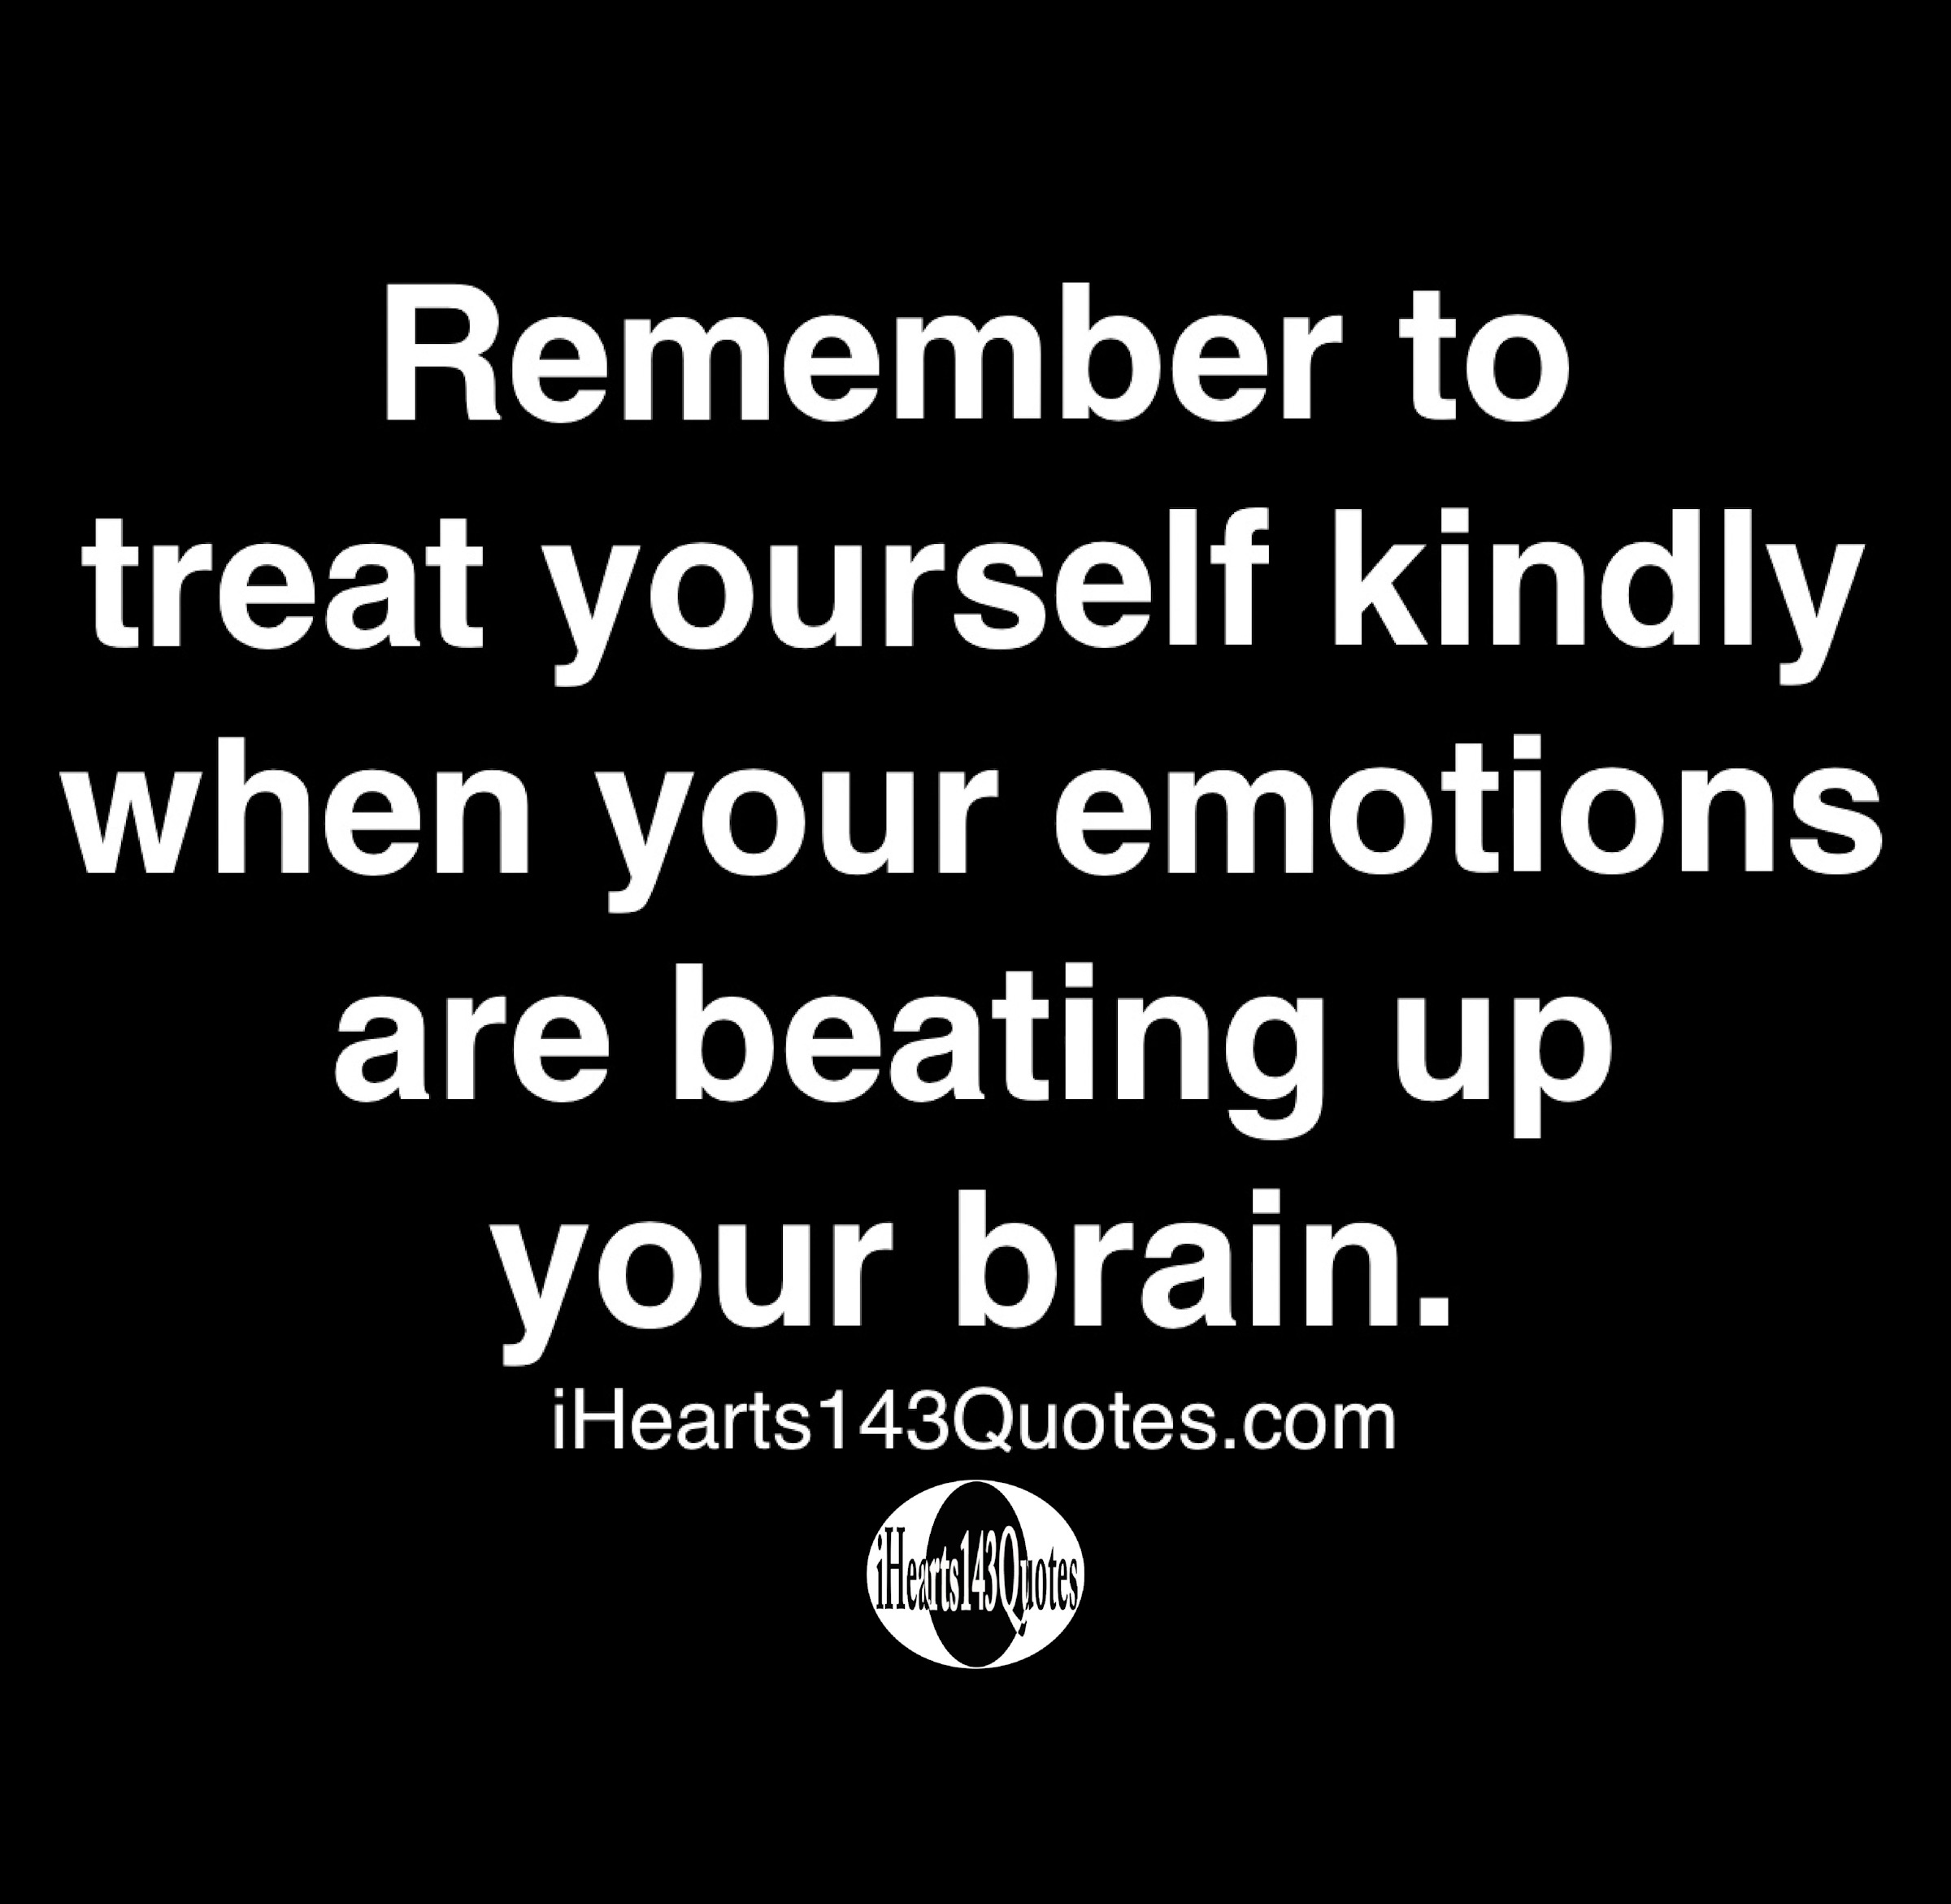 remember to treat yourself kindly when your emotions are beating up your brain